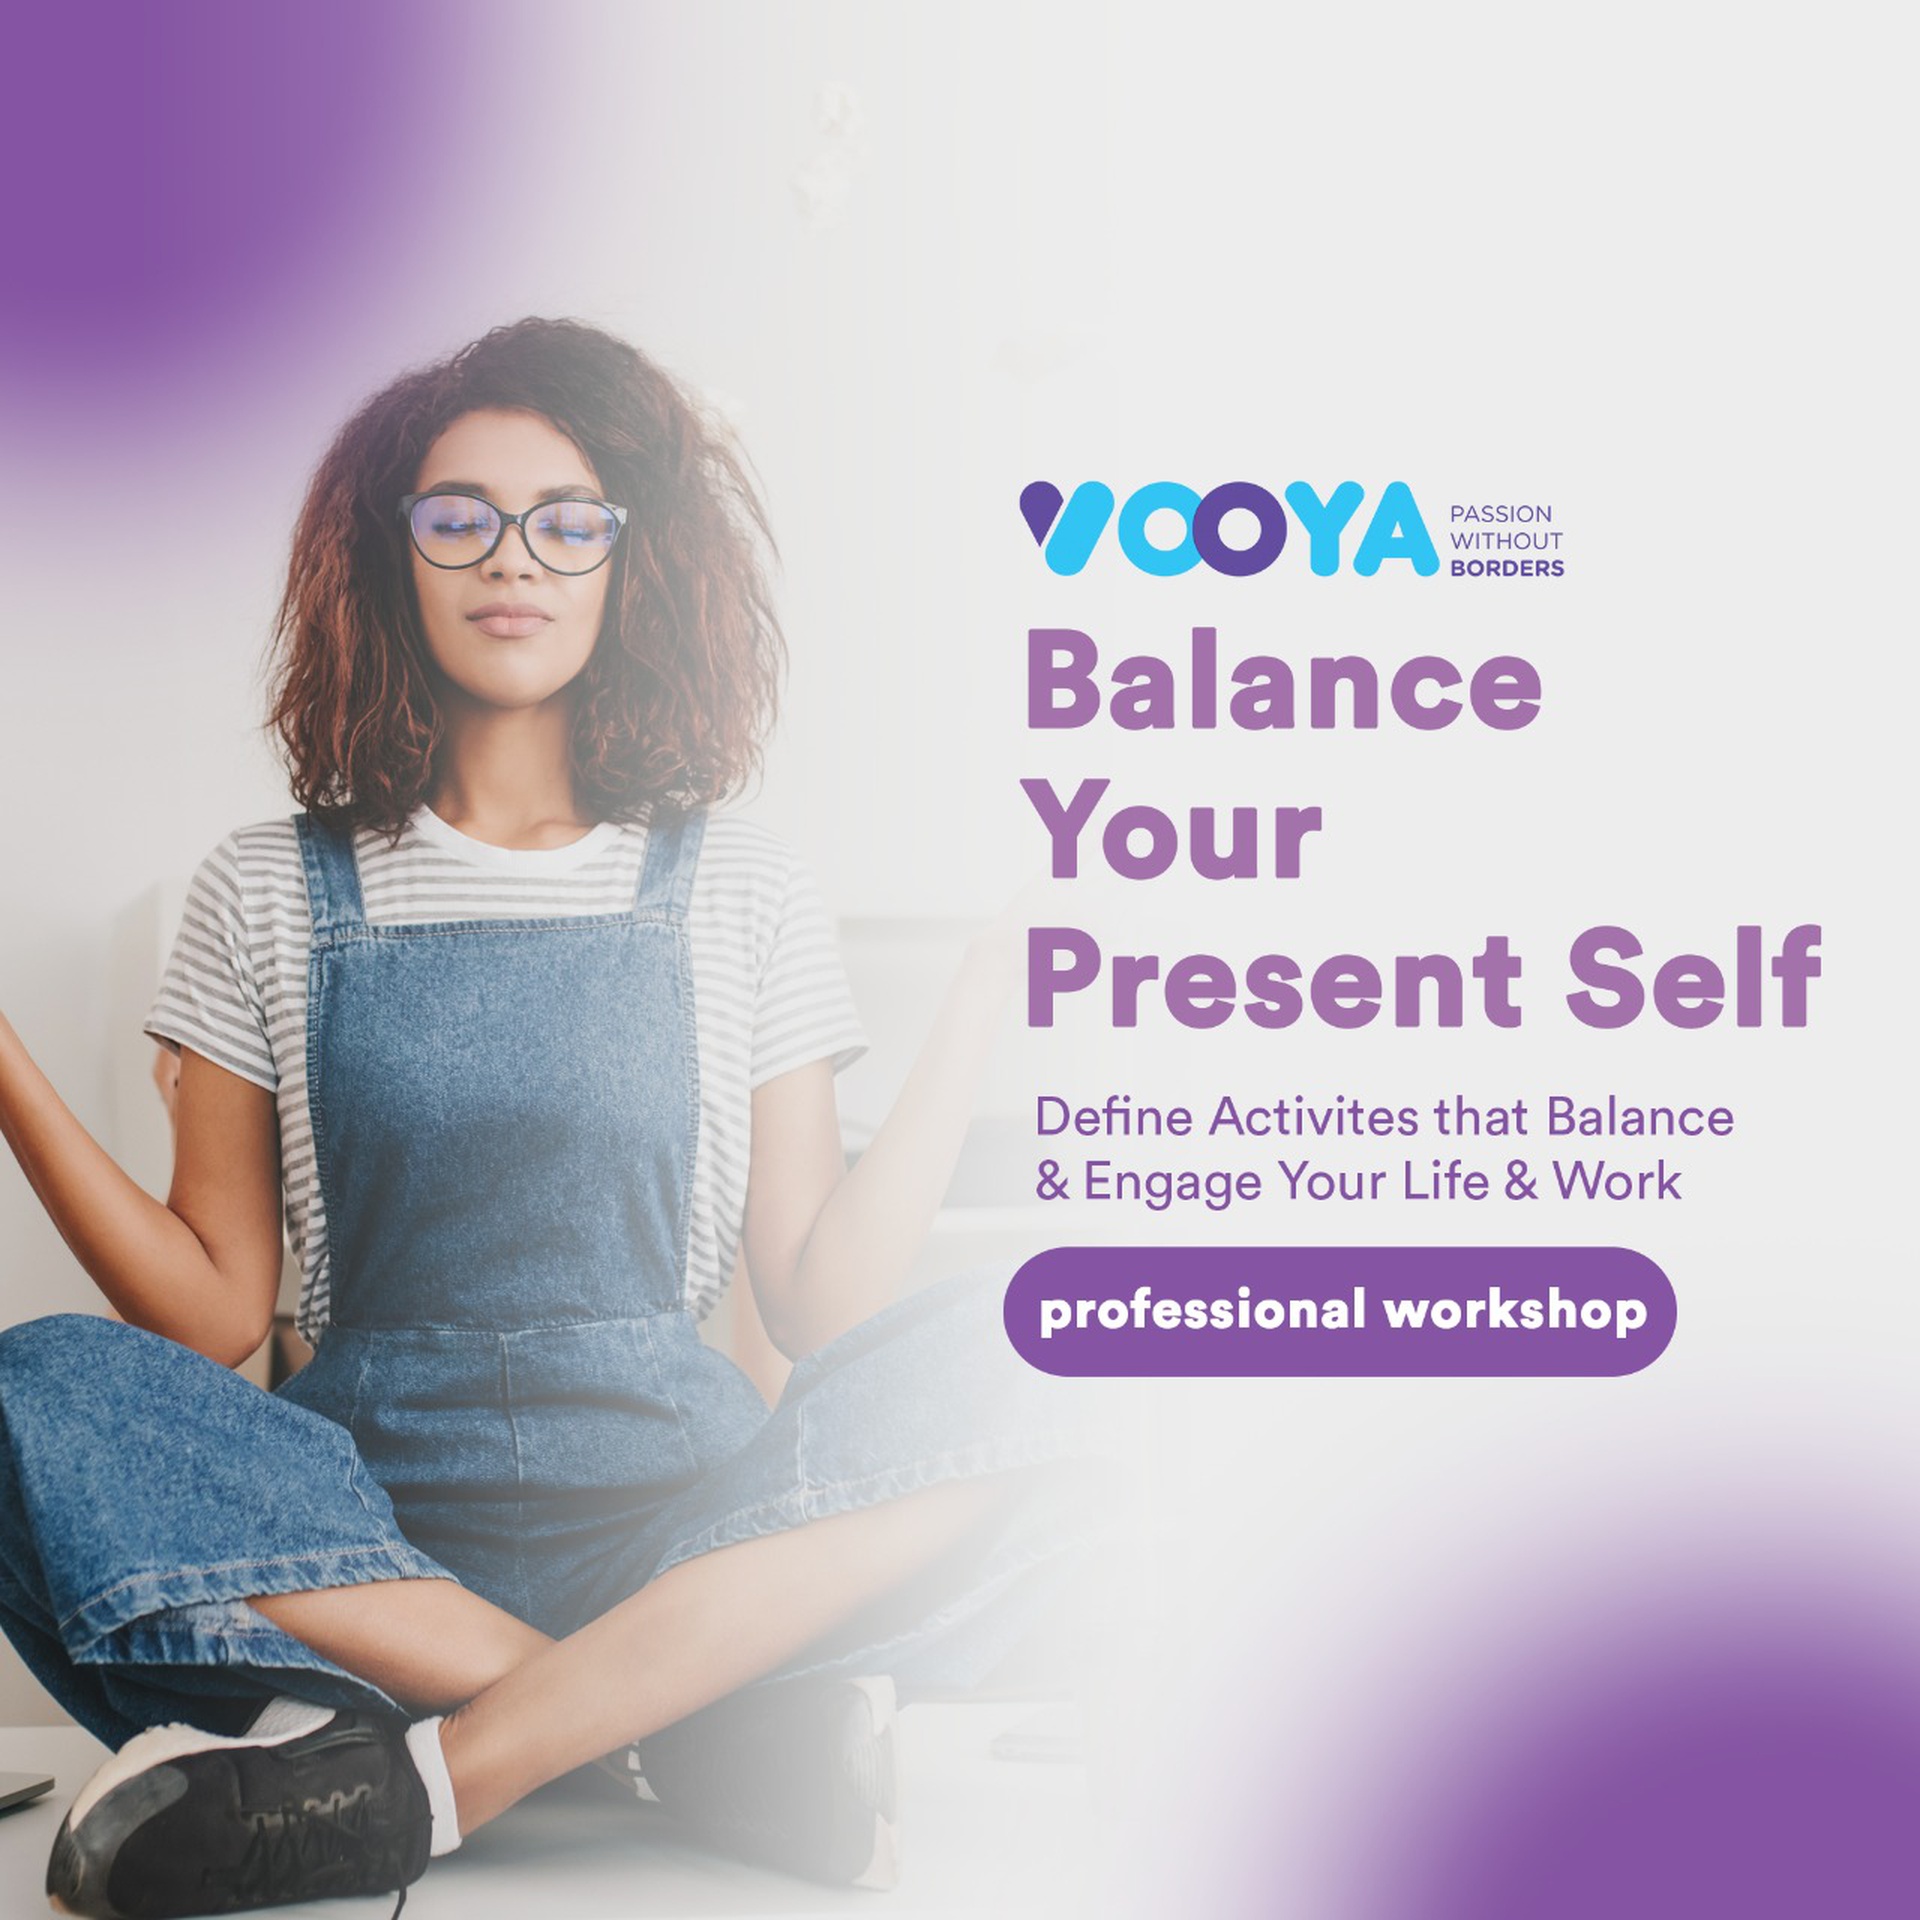 Balance Your Present Self: Define Activities that Balance & Engage Your Life & Work